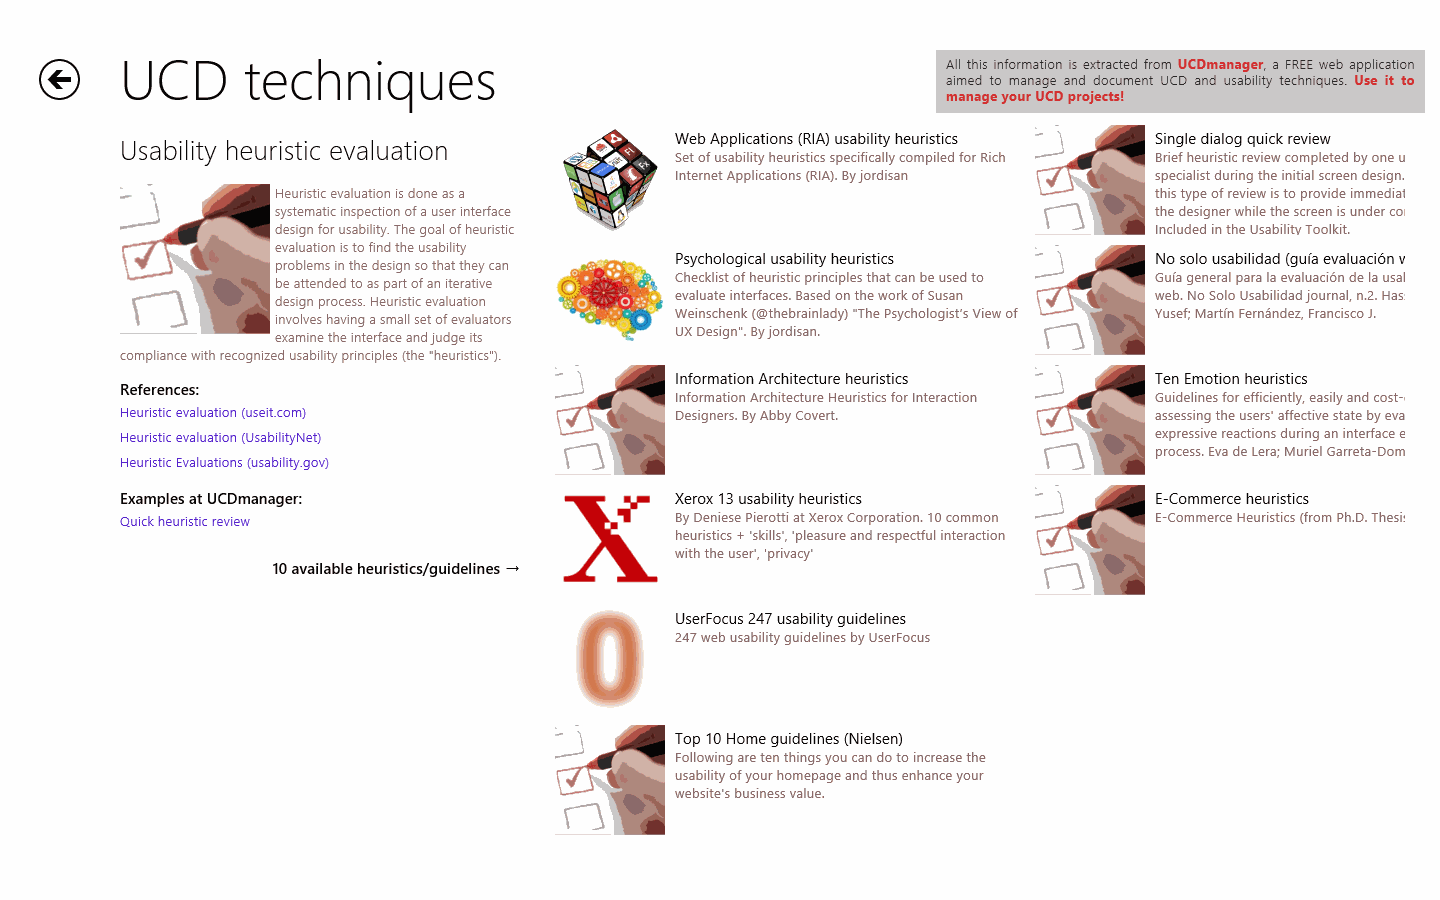 Detail of a technique (usability heuristic evaluation) and available heuristics